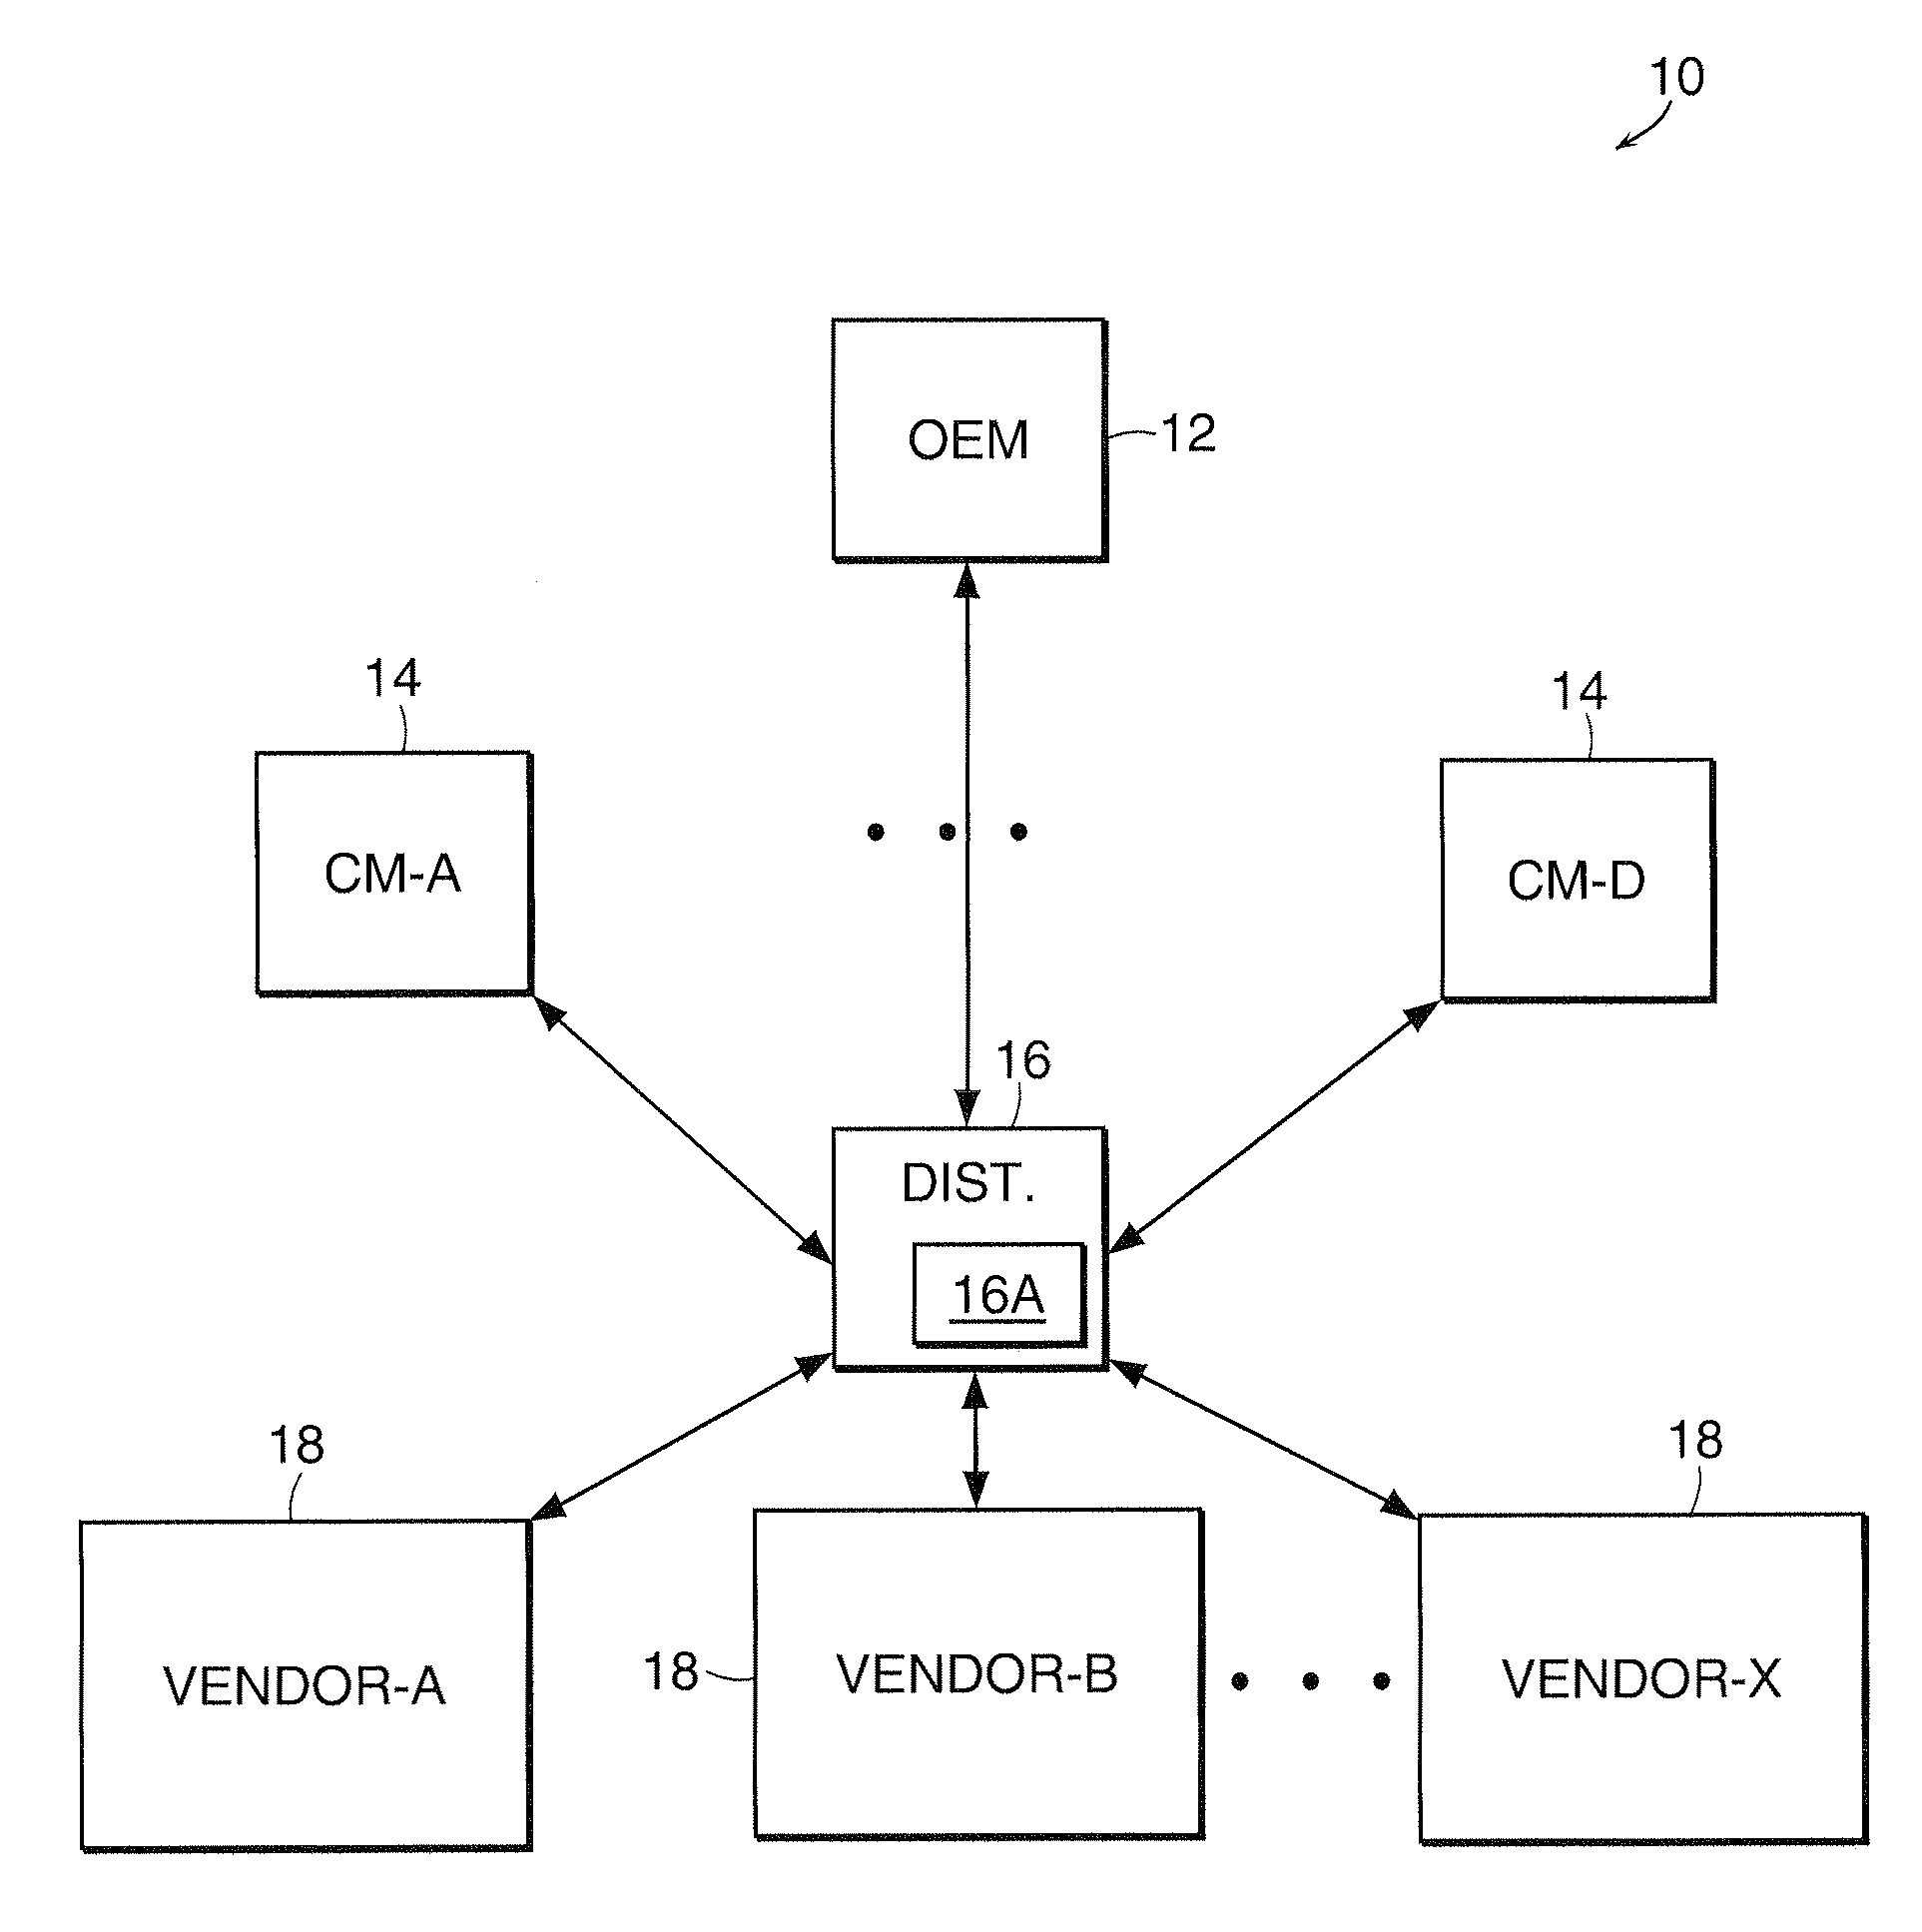 Method And System For Monitoring A Supply-Chain